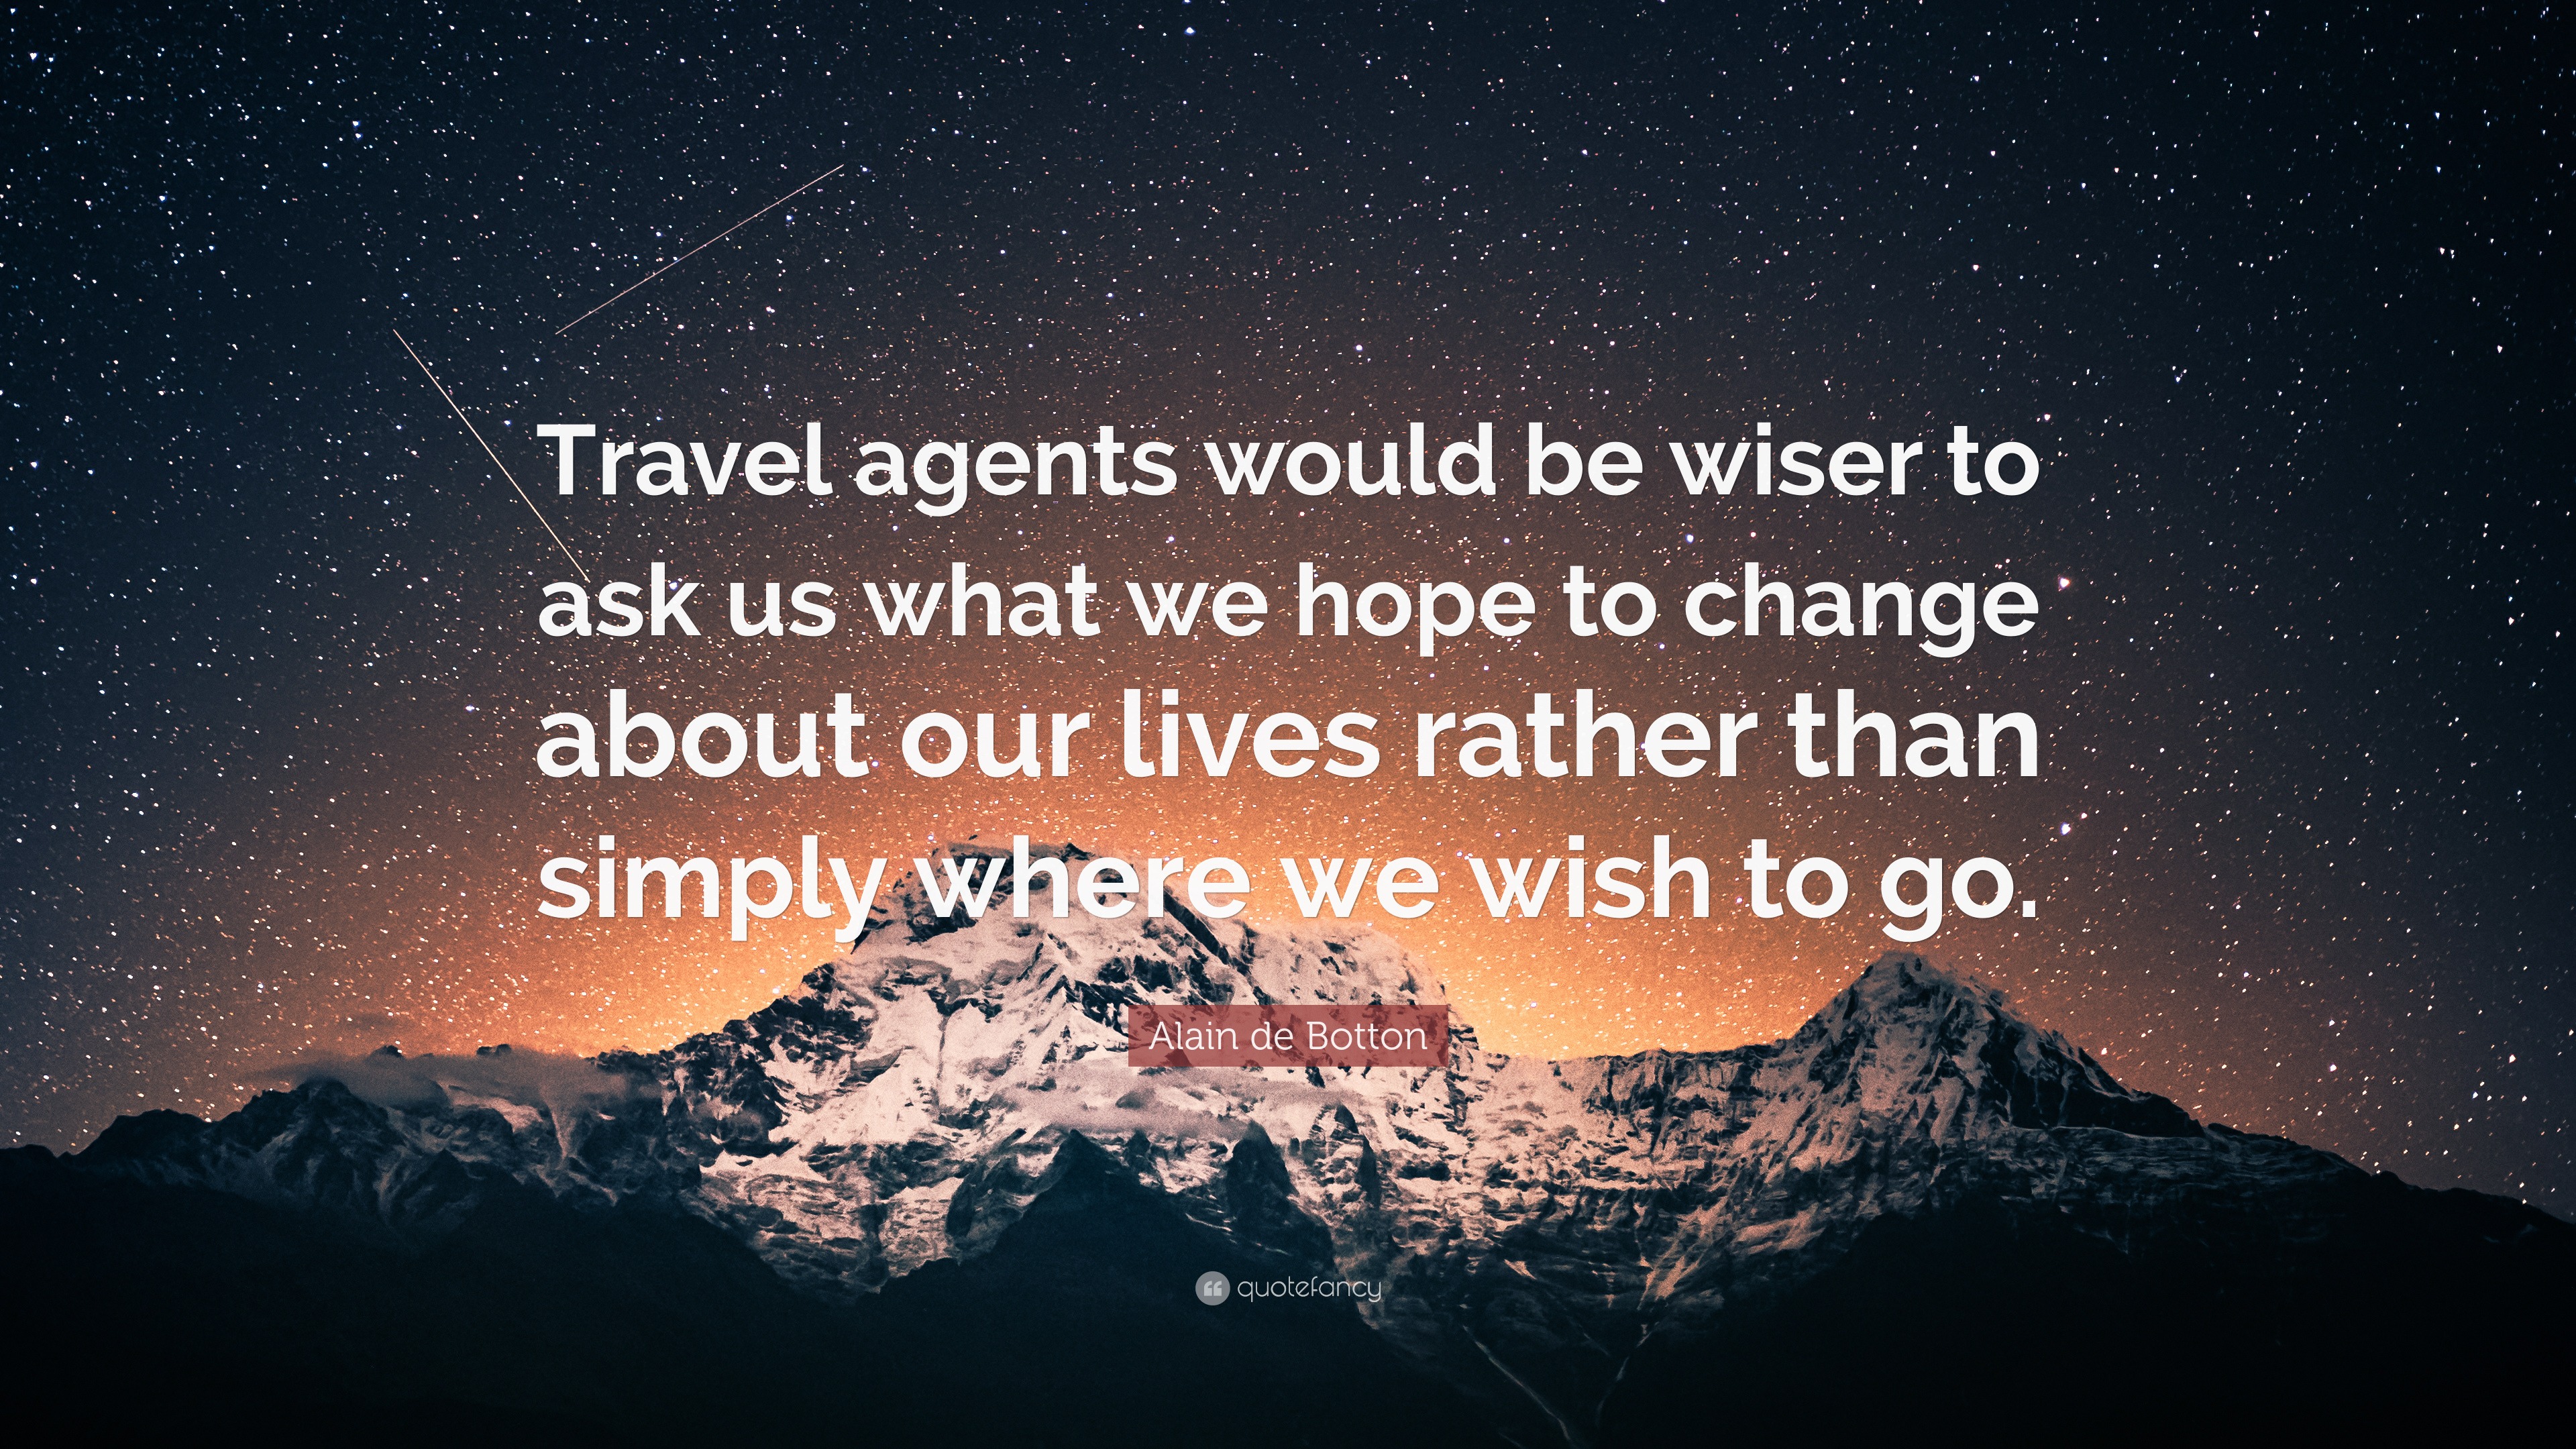 quotes on travel agents